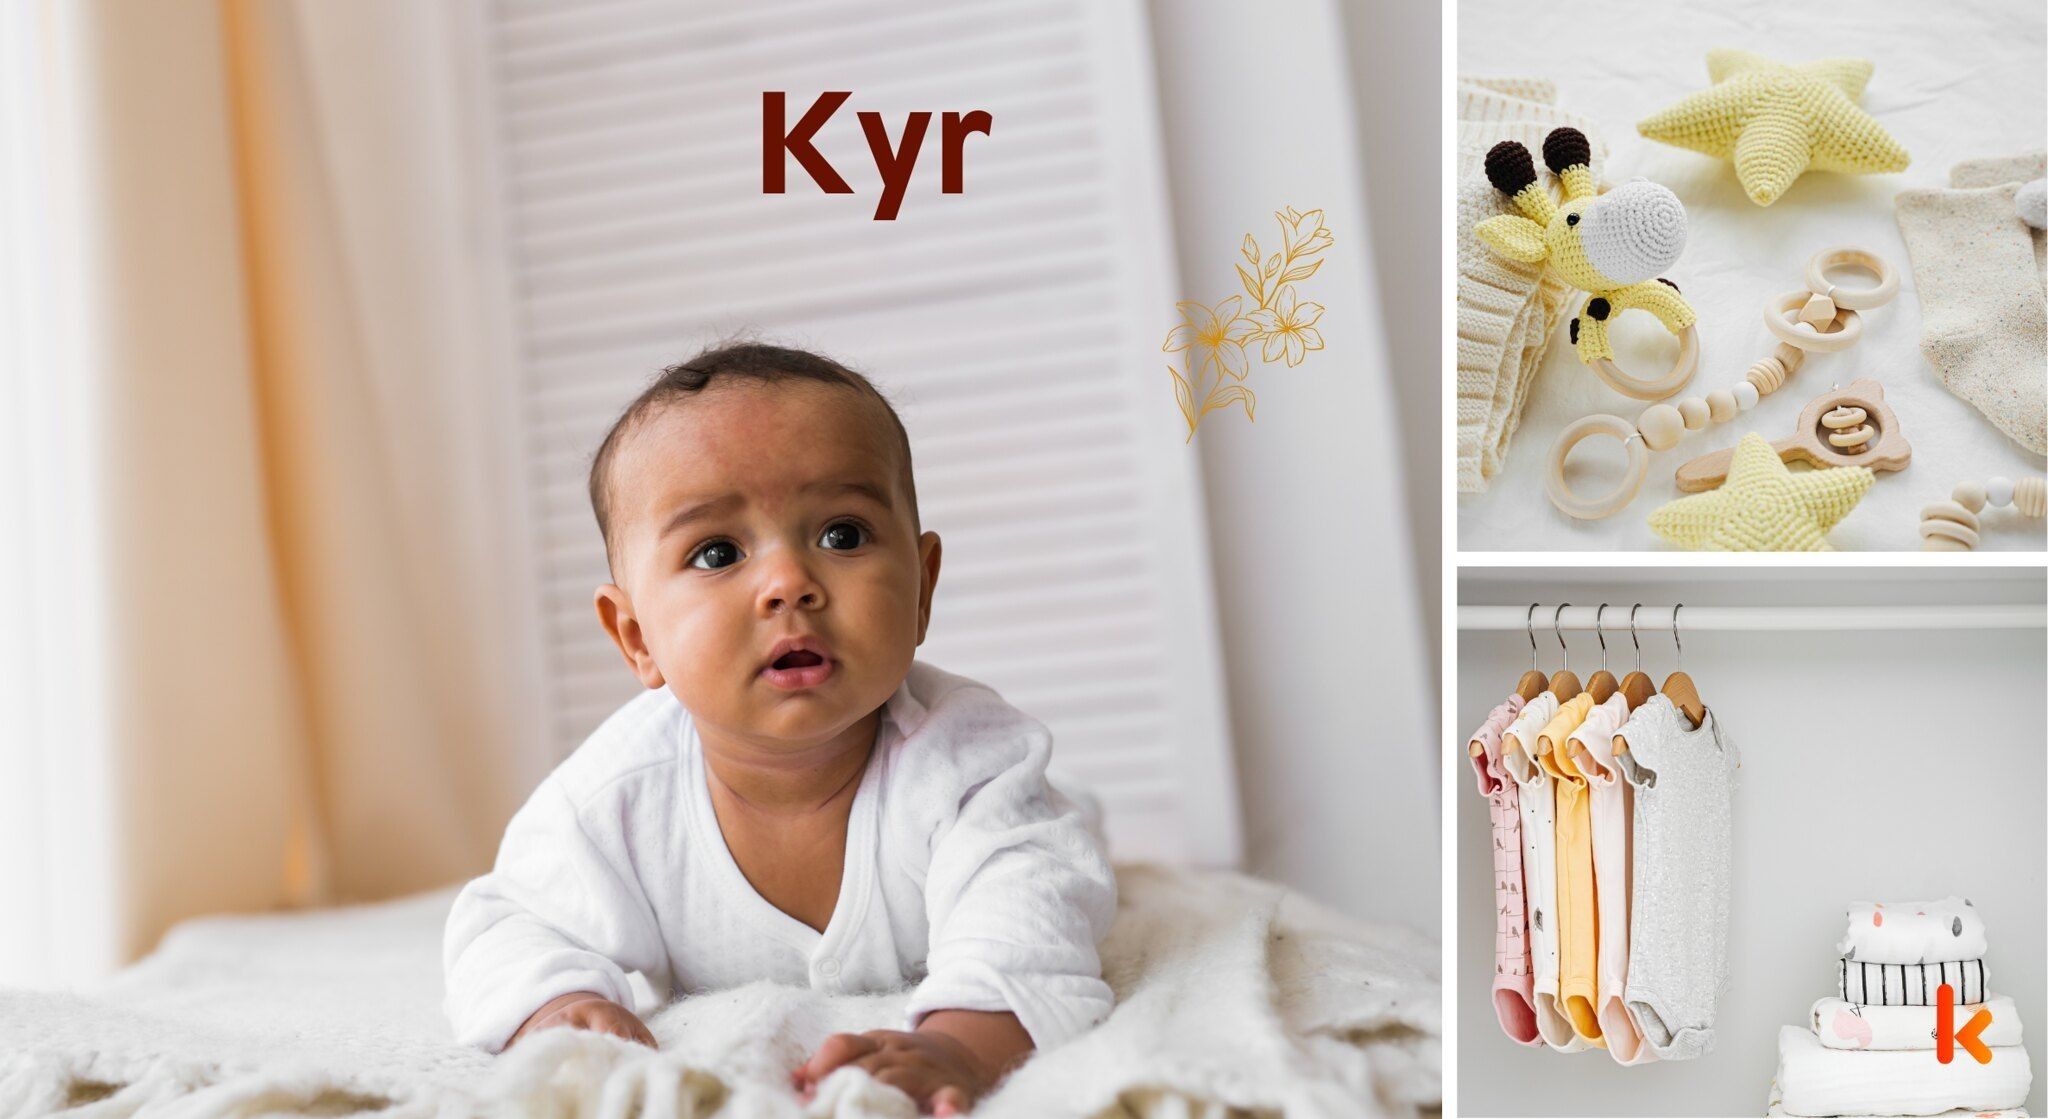 Meaning of the name Kyr